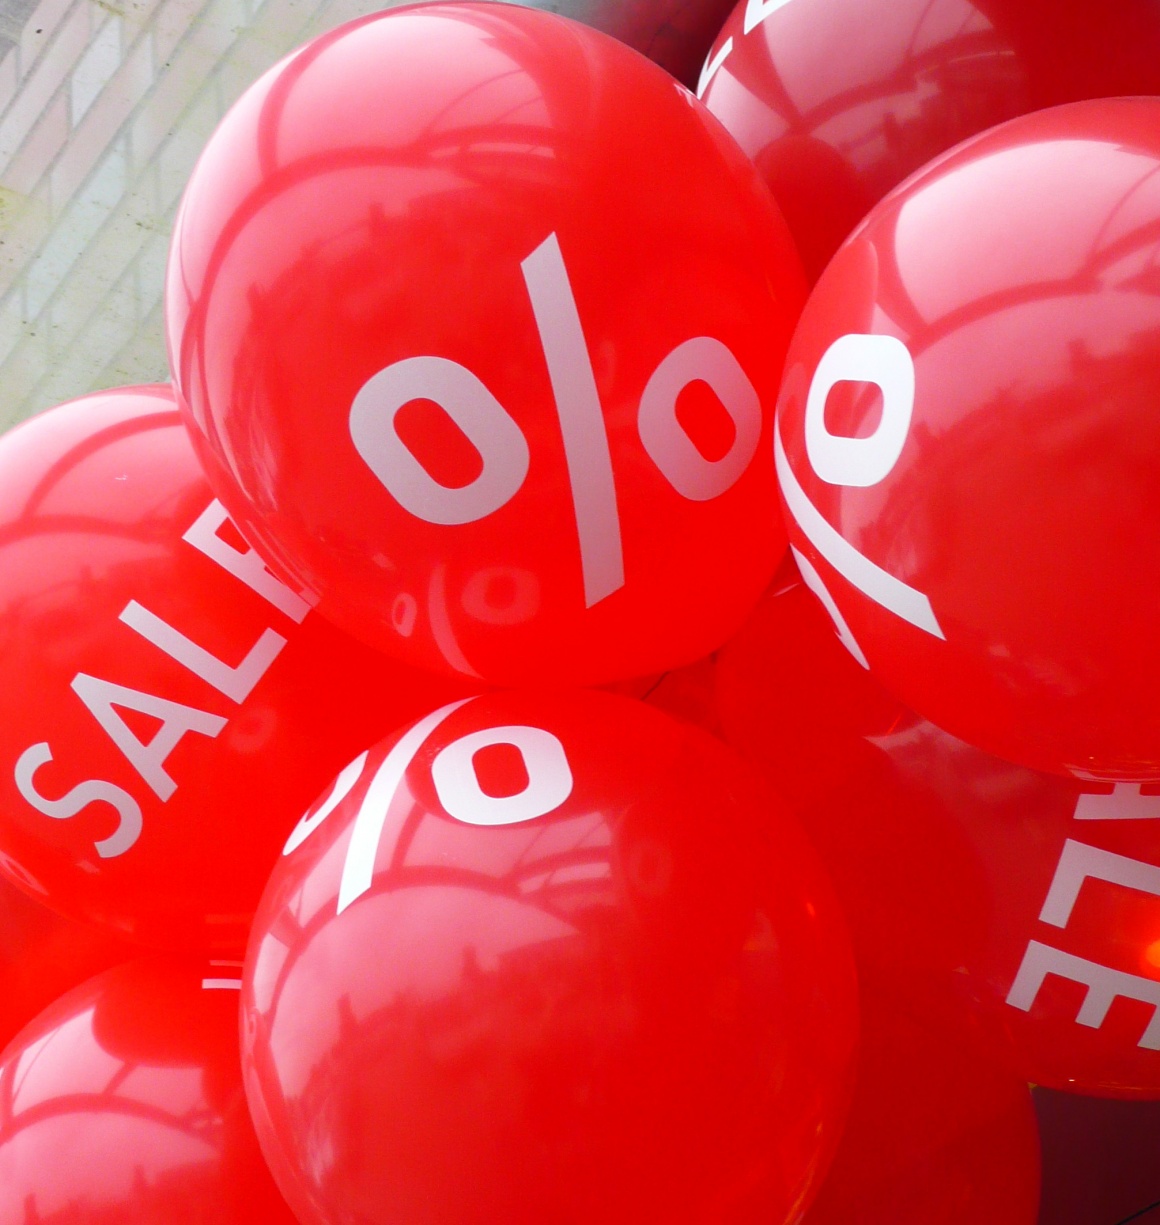 red balloons with sales promotion text